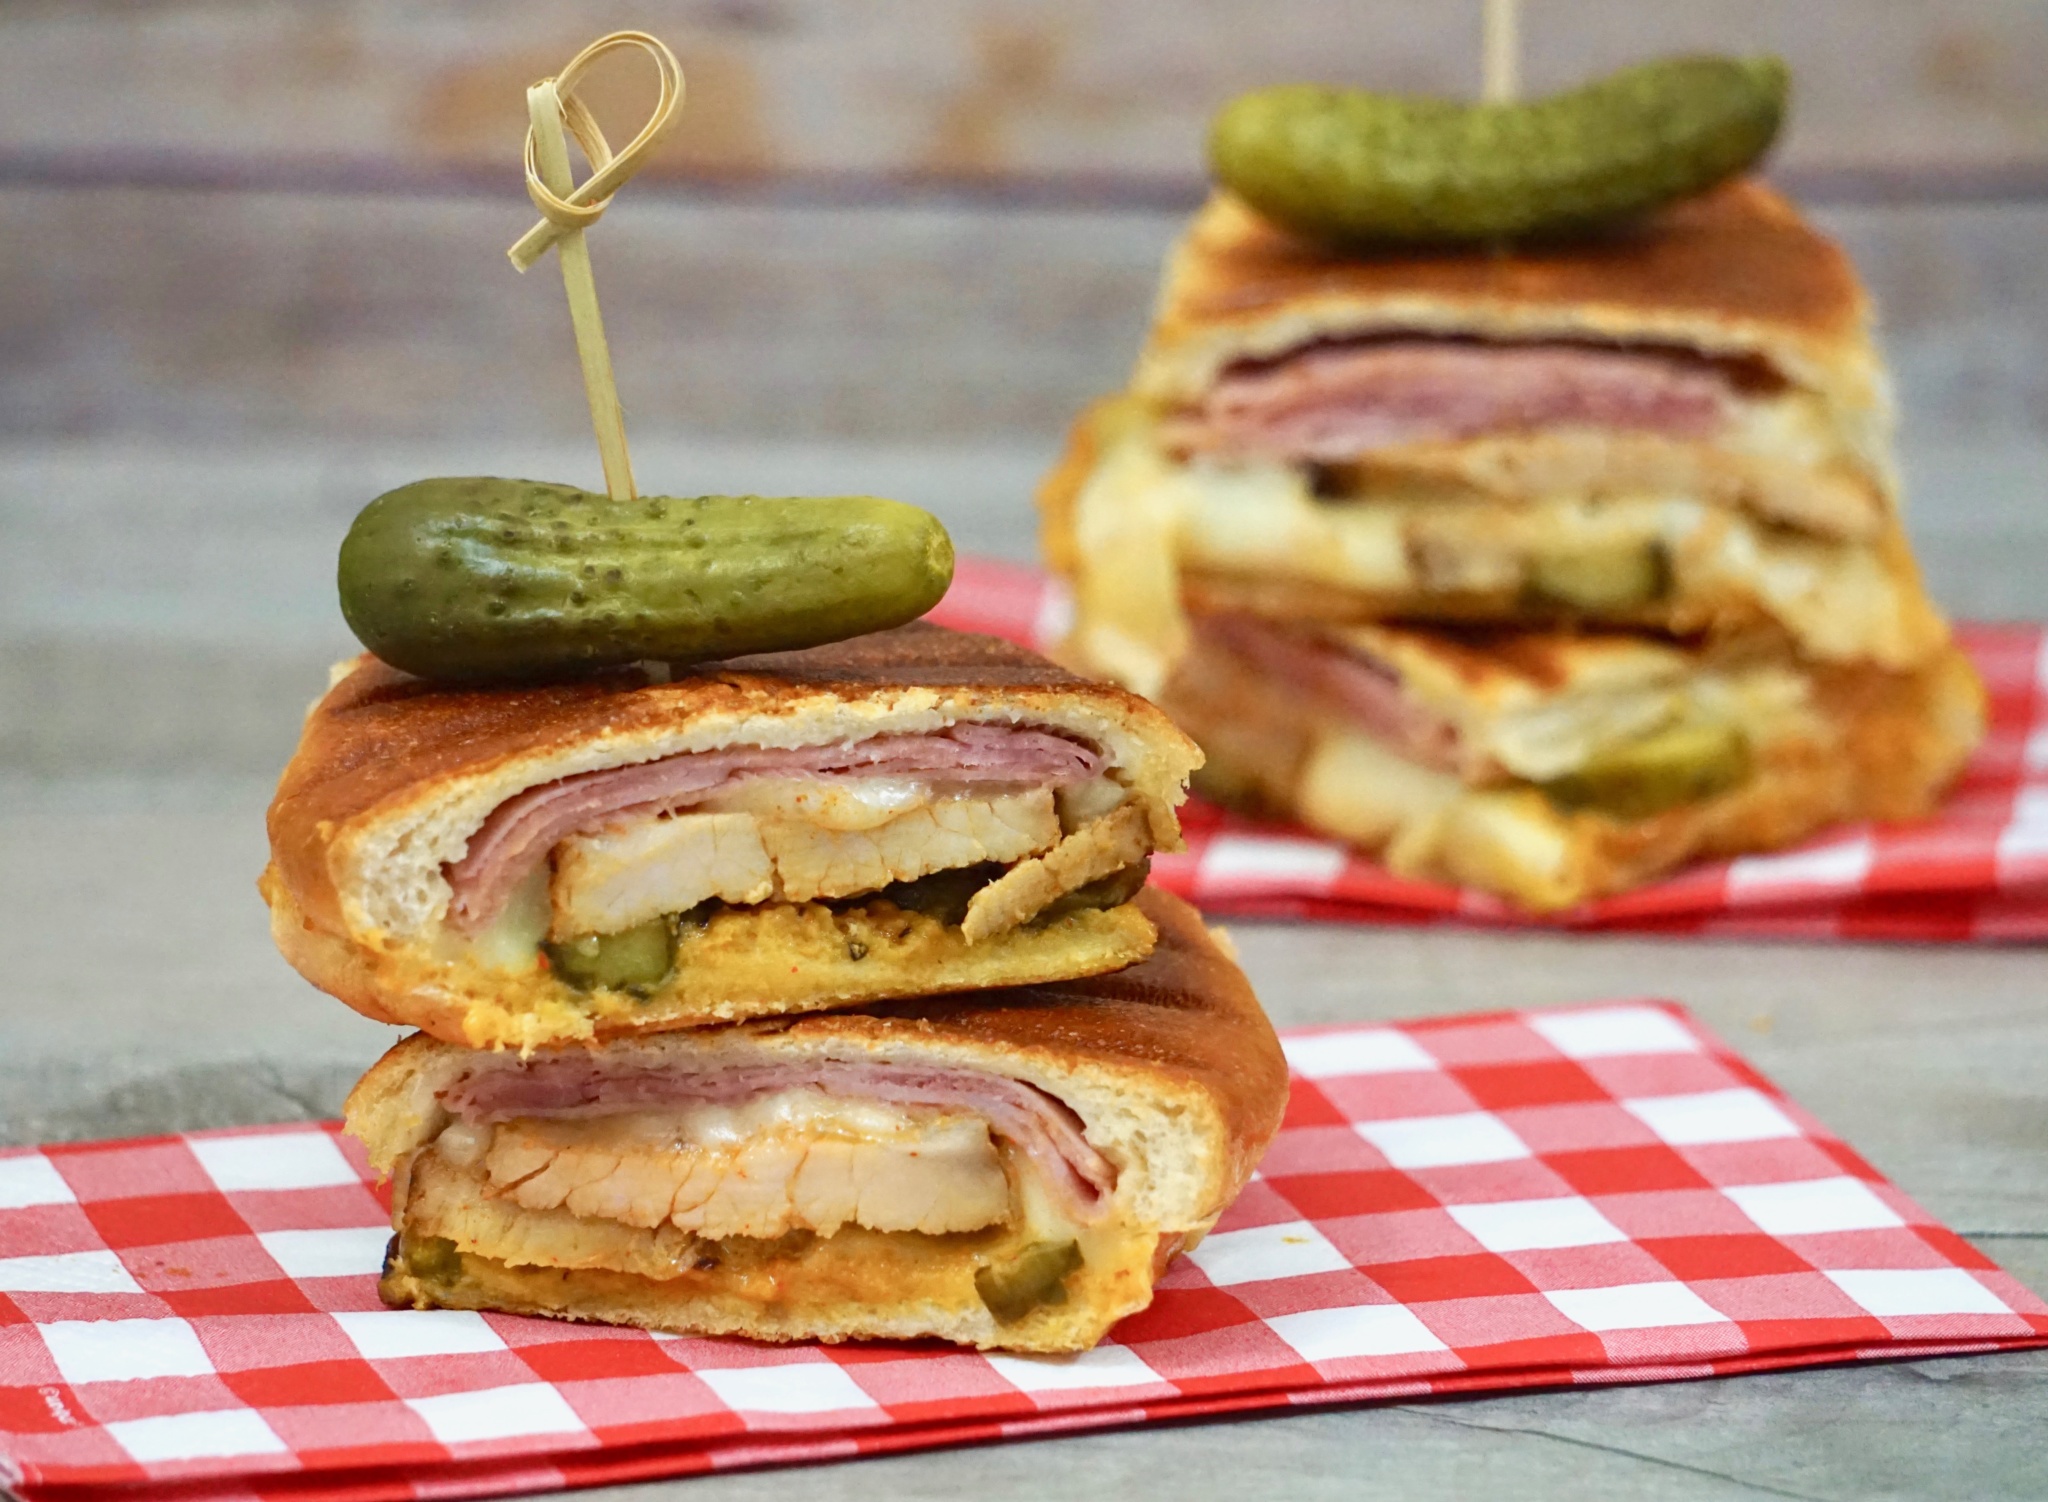 Grilled Chipotle Cuban Sandwiches